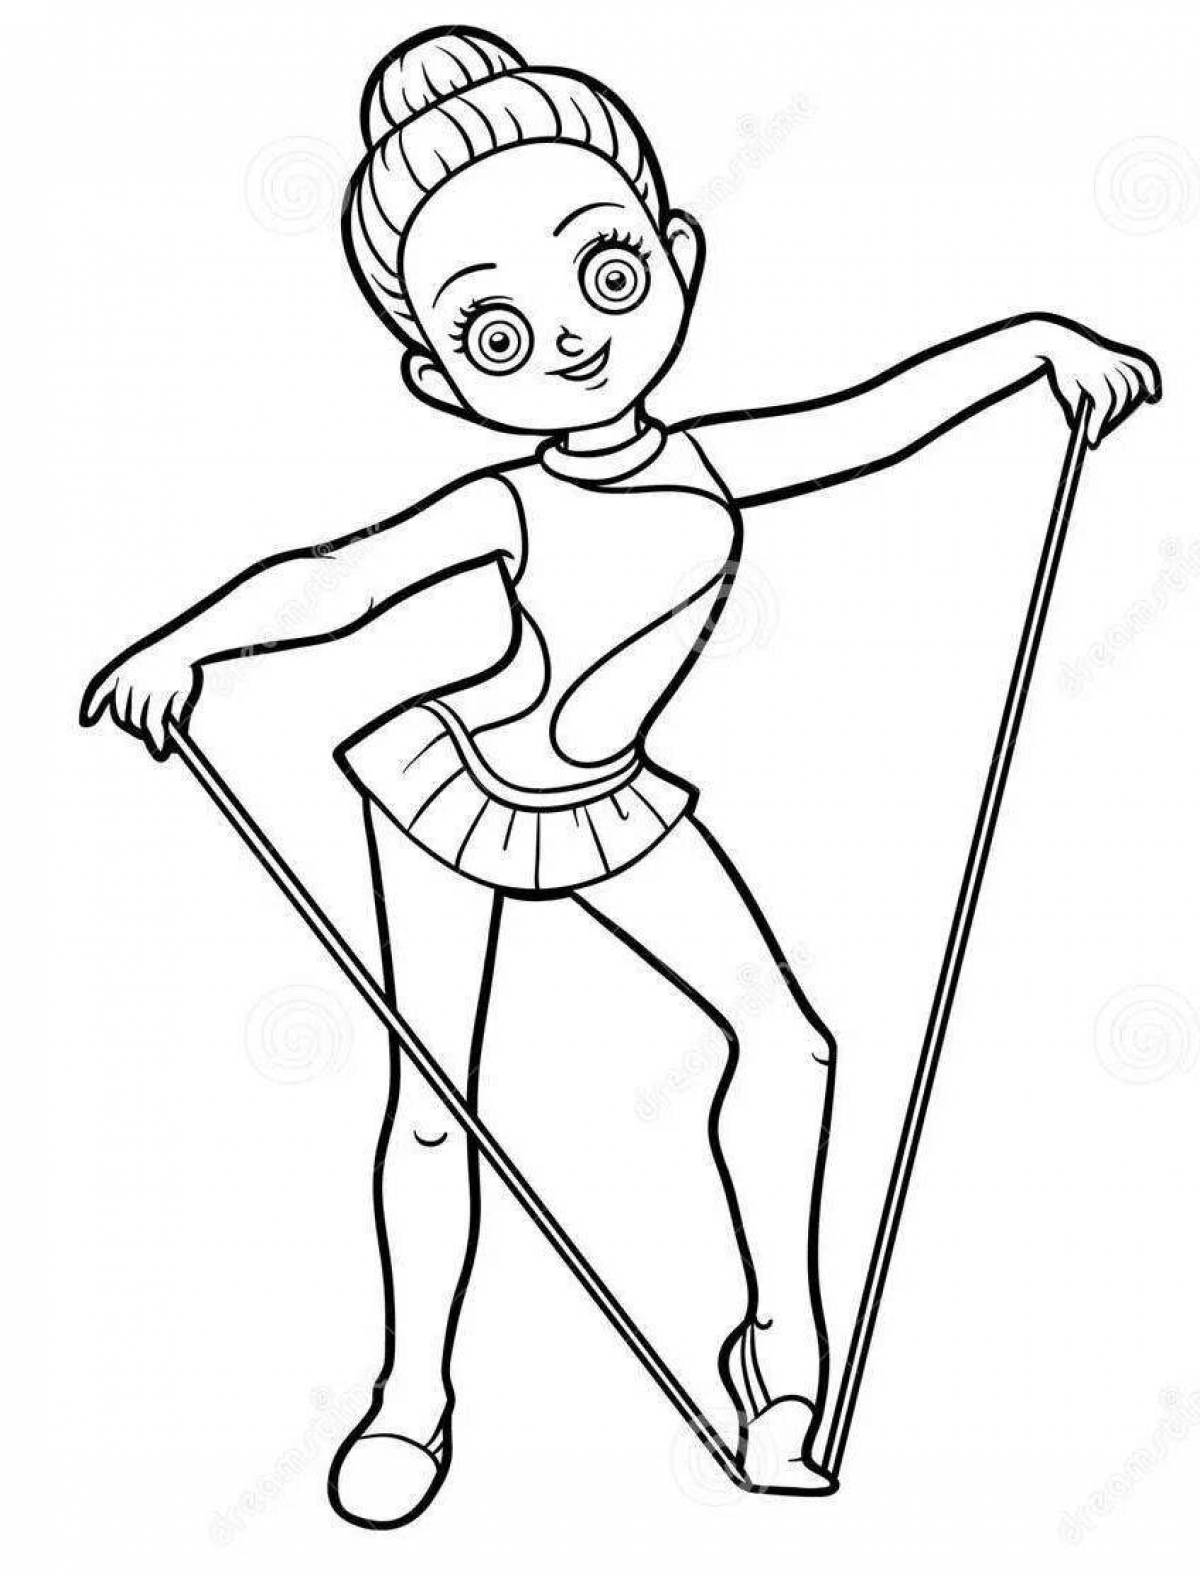 Coloring page graceful gymnasts